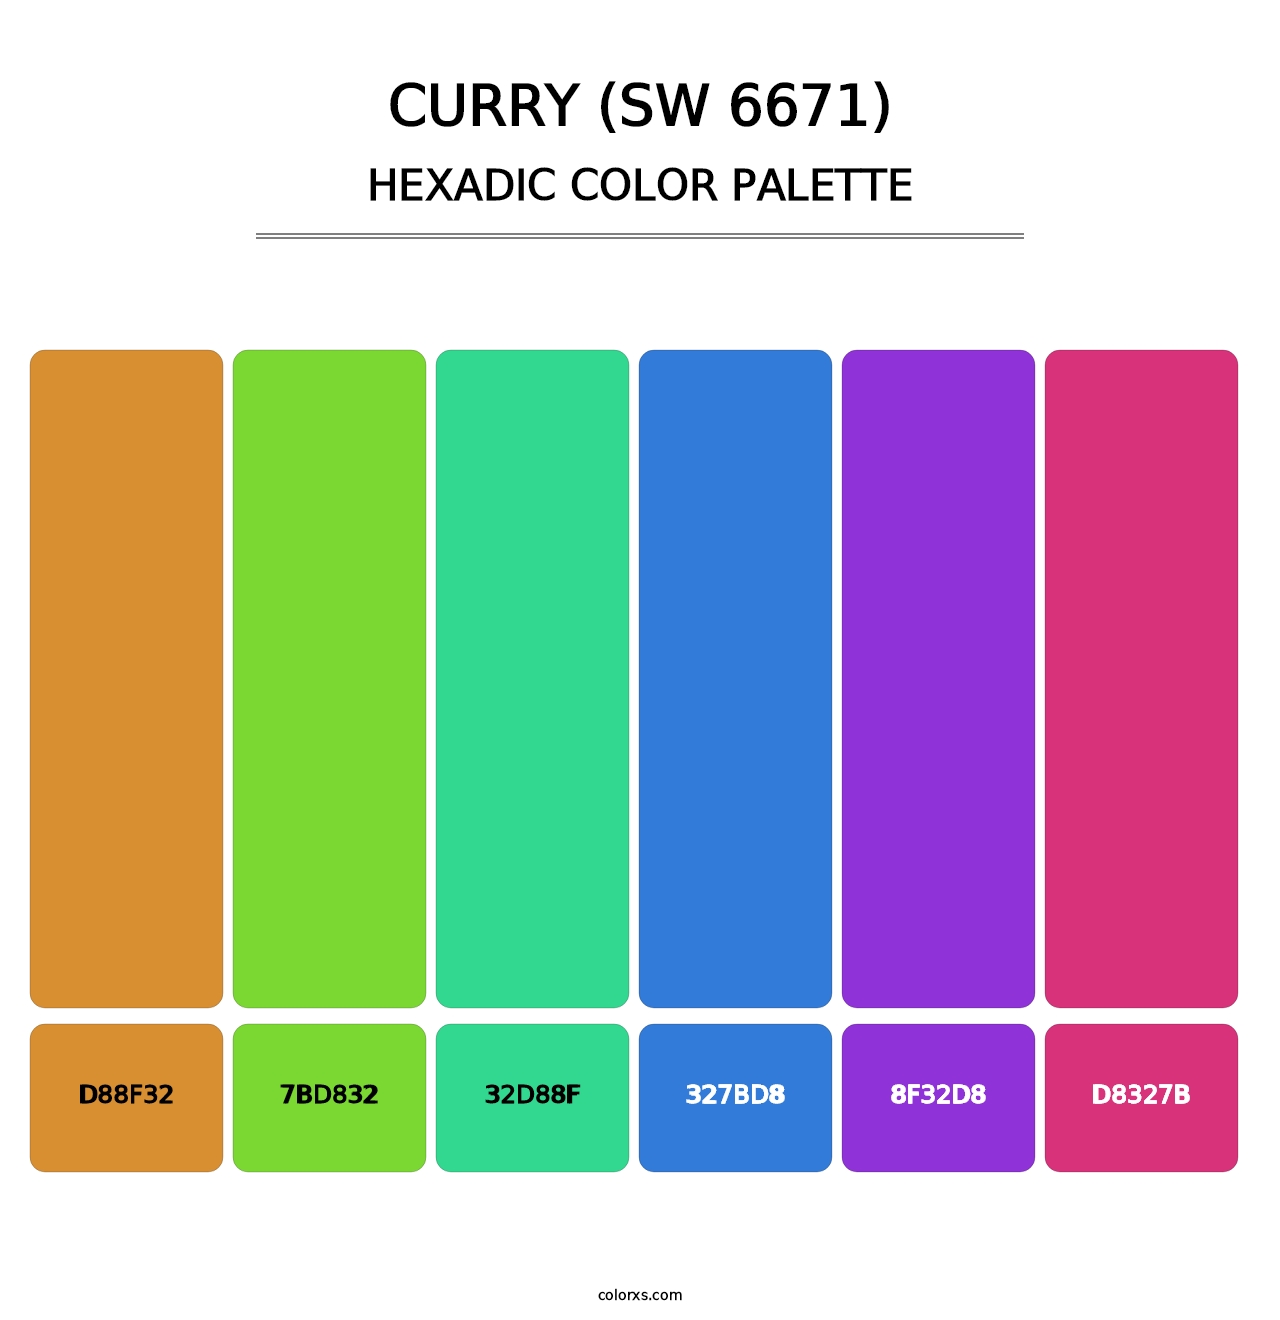 Curry (SW 6671) - Hexadic Color Palette